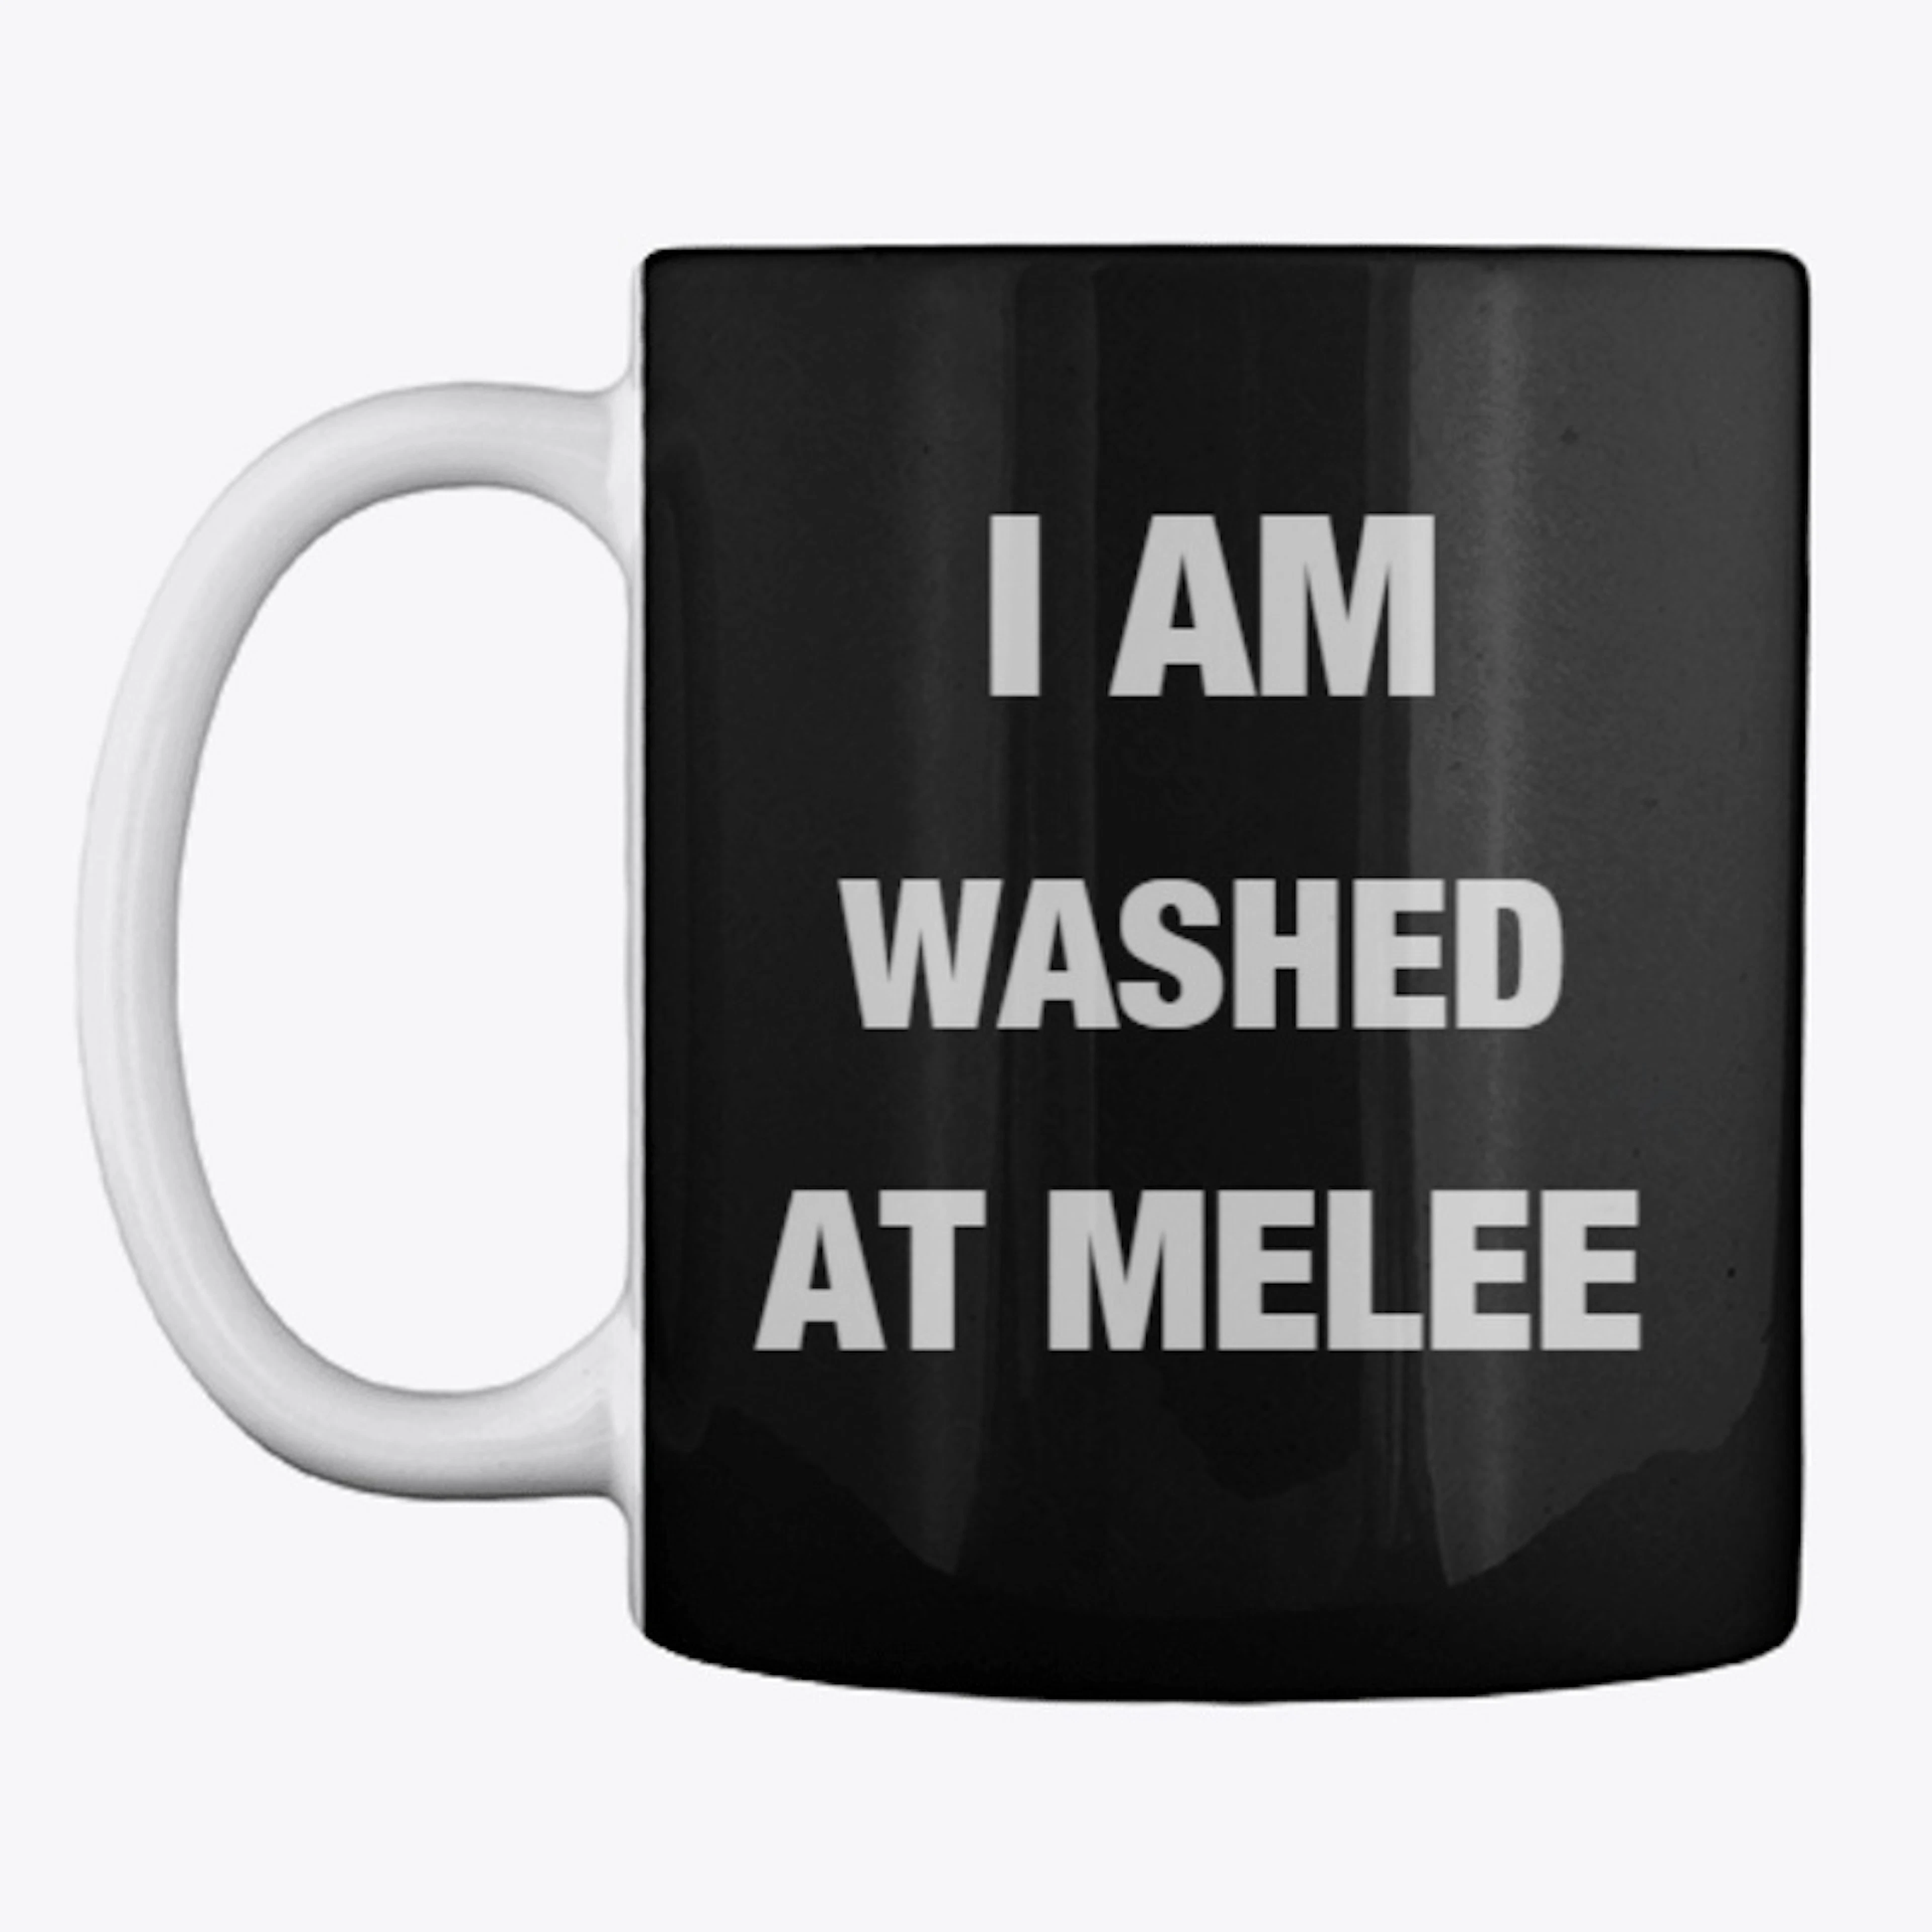 Washed at Melee